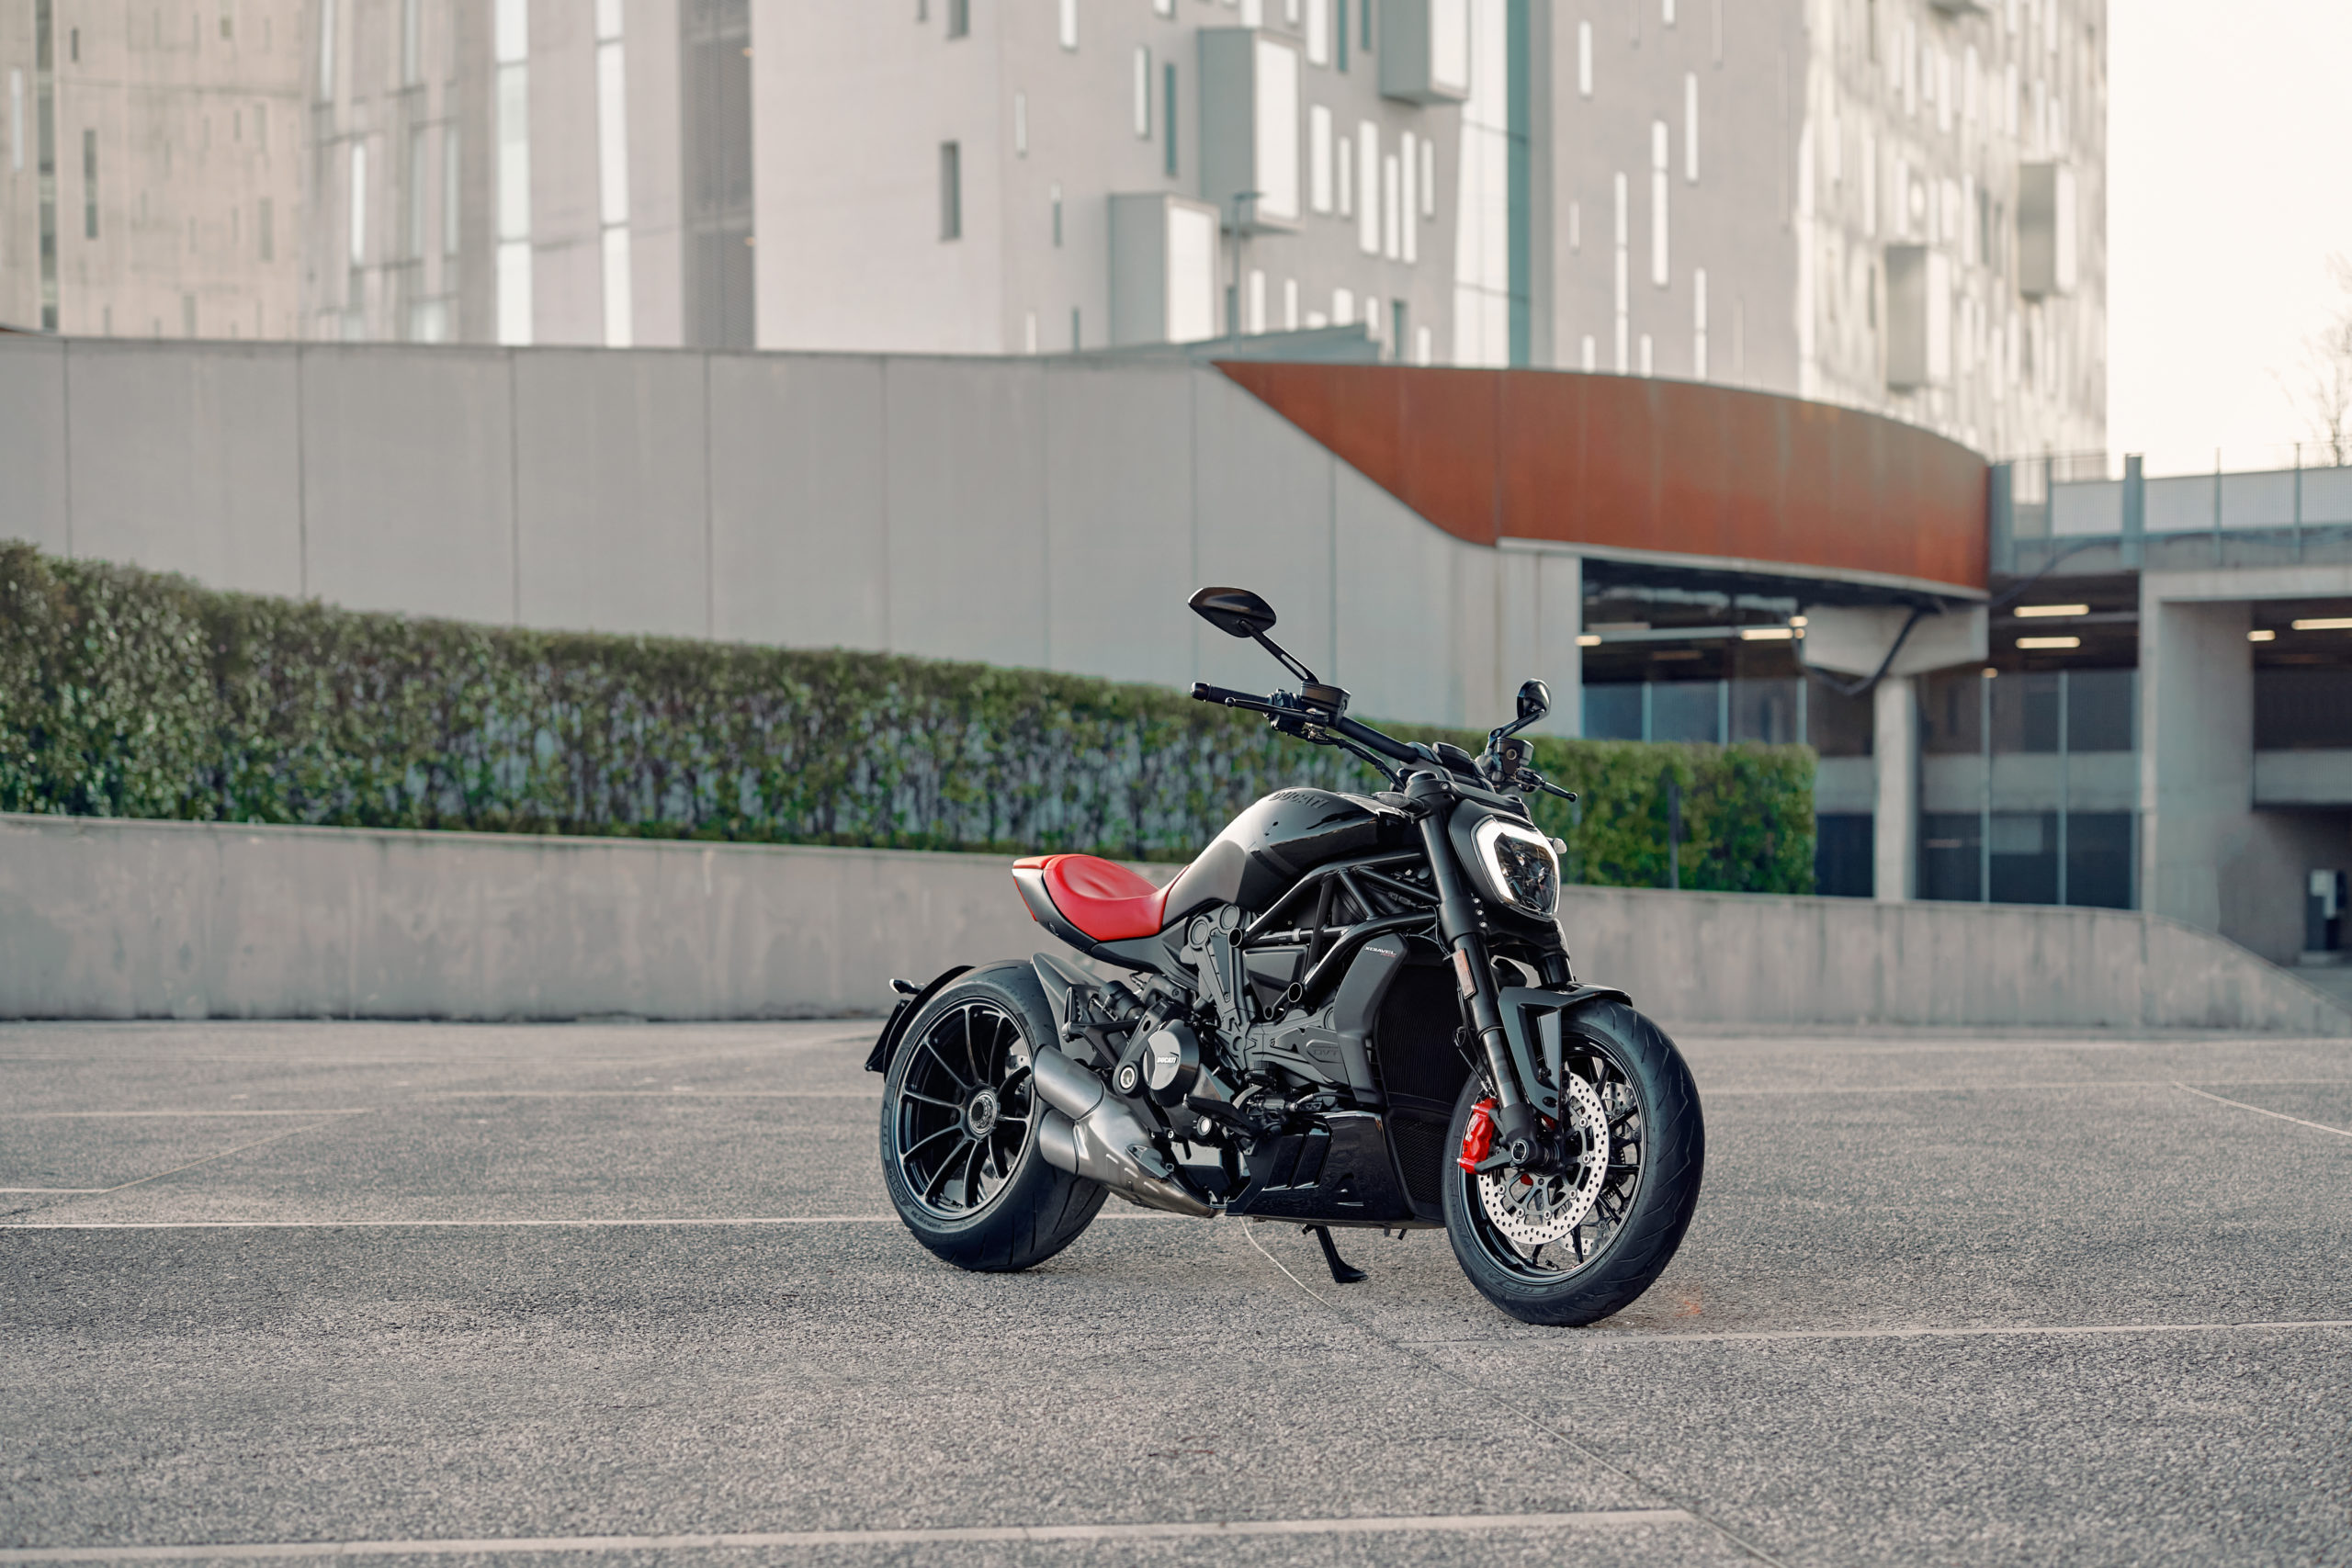 A view of the Ducati XDiavel Nera, complete with dedicated accoutrements